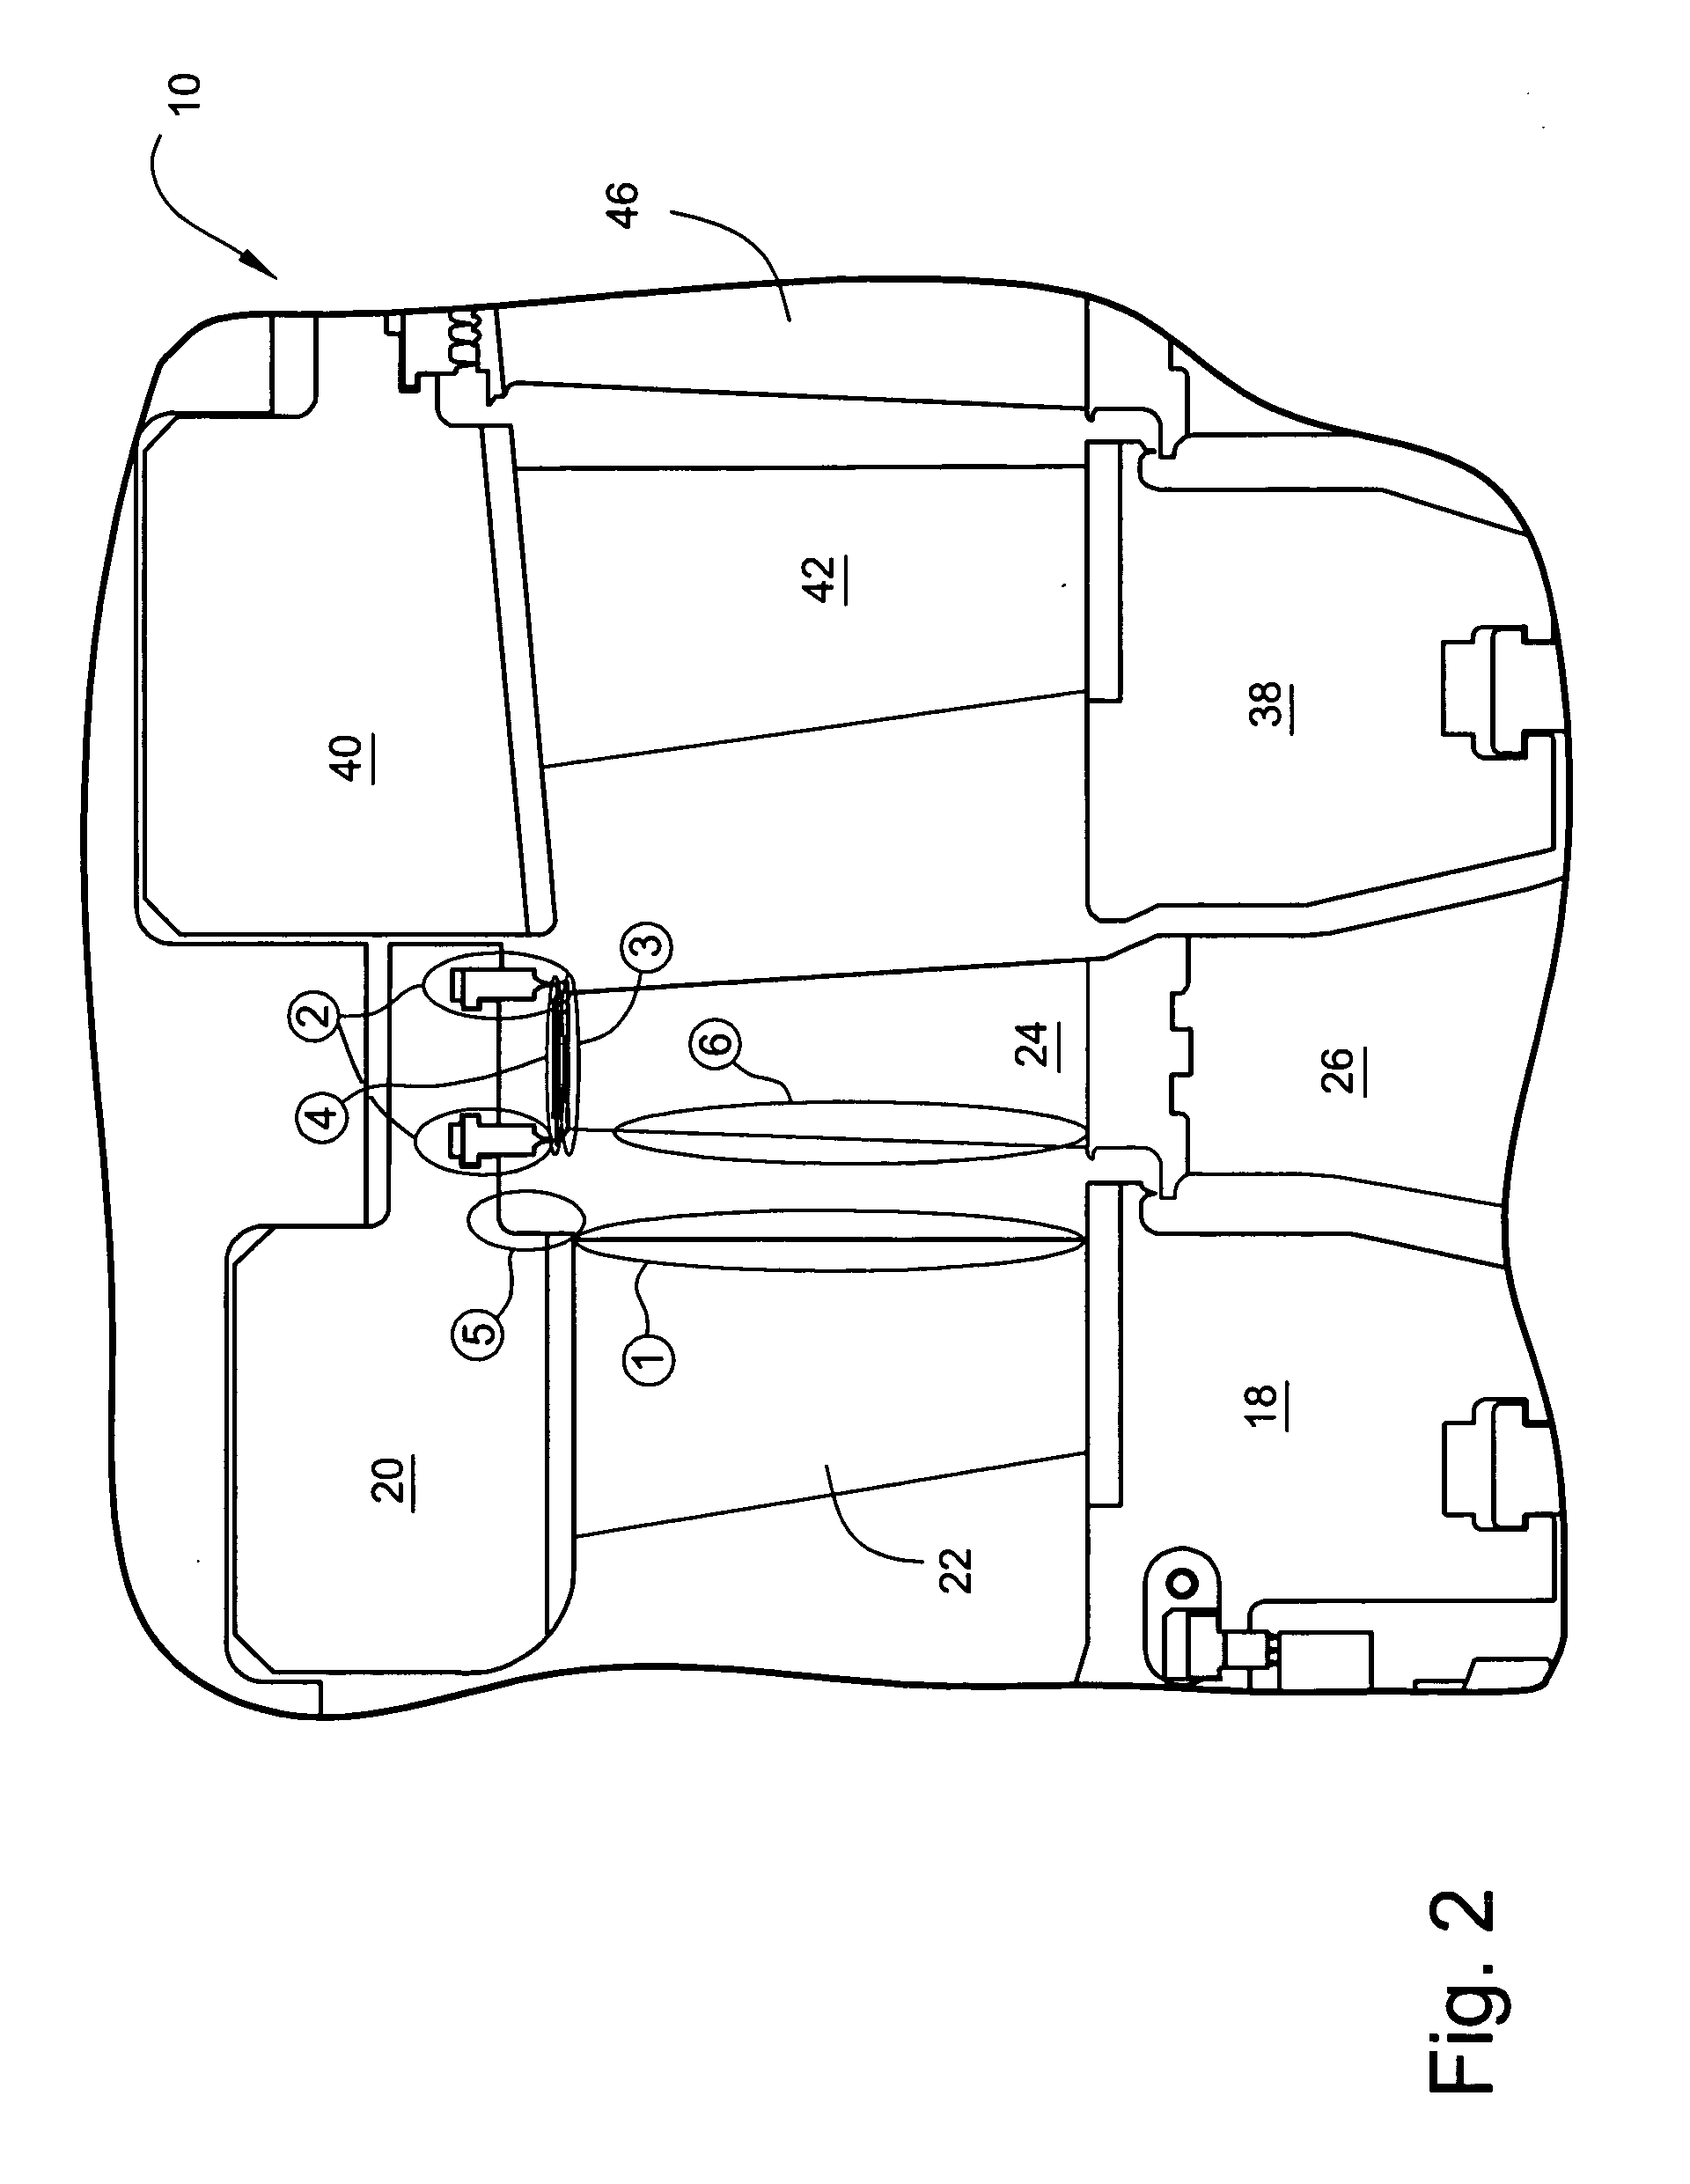 Apparatus and methods for minimizing solid particle erosion in steam turbines